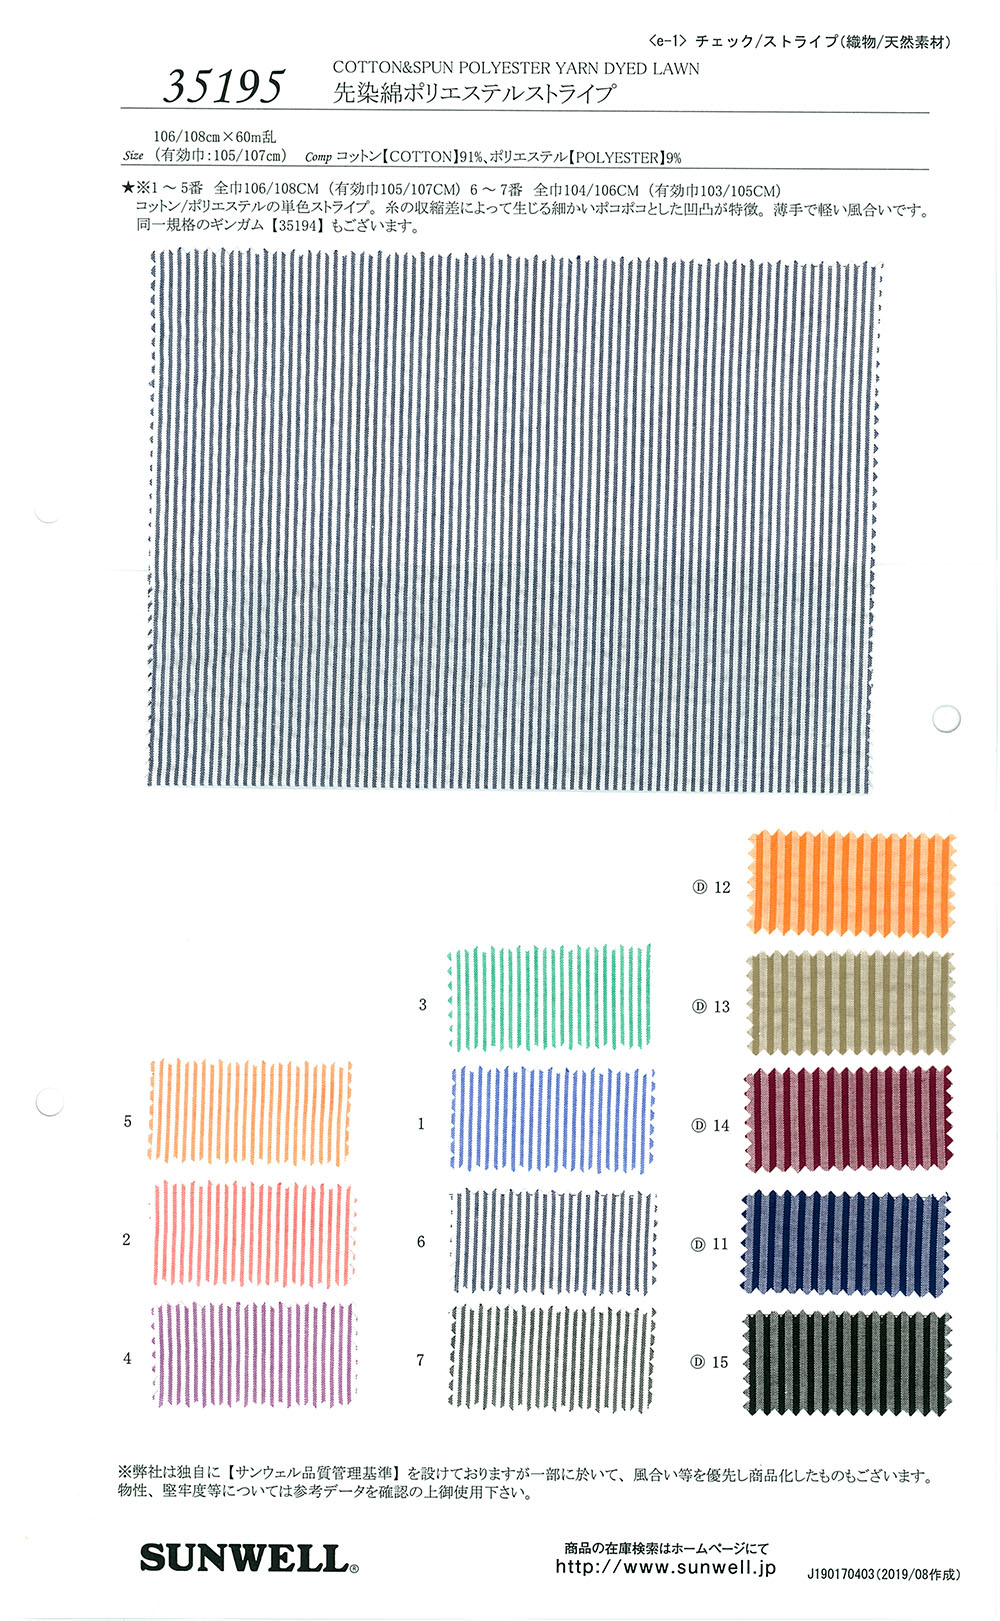 35195 Yarn-dyed Cotton Polyester Stripe[Textile / Fabric] SUNWELL